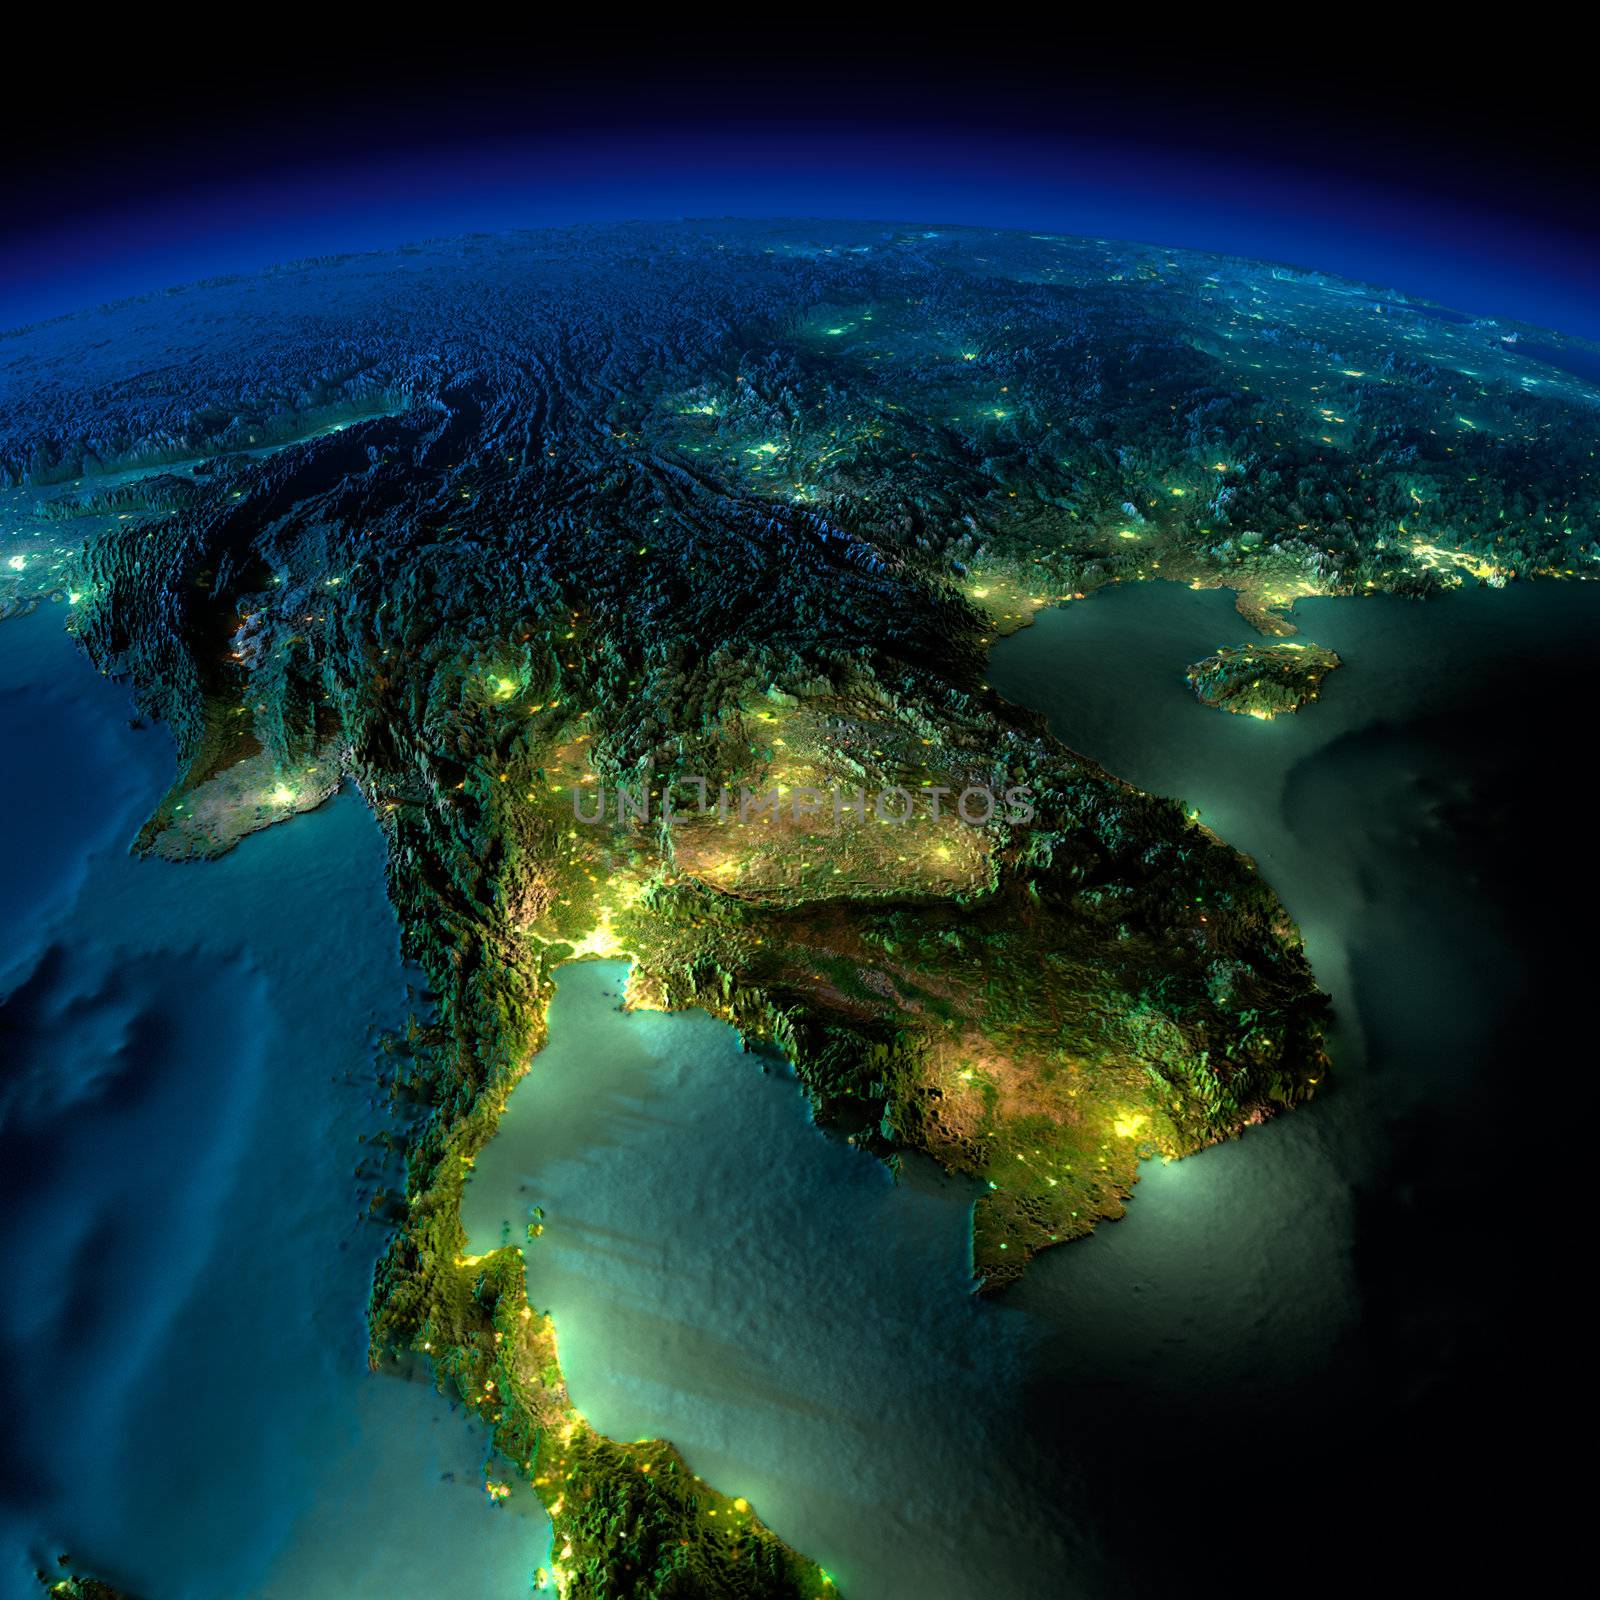 Night Earth. A piece of Asia - Indochina peninsula by Antartis